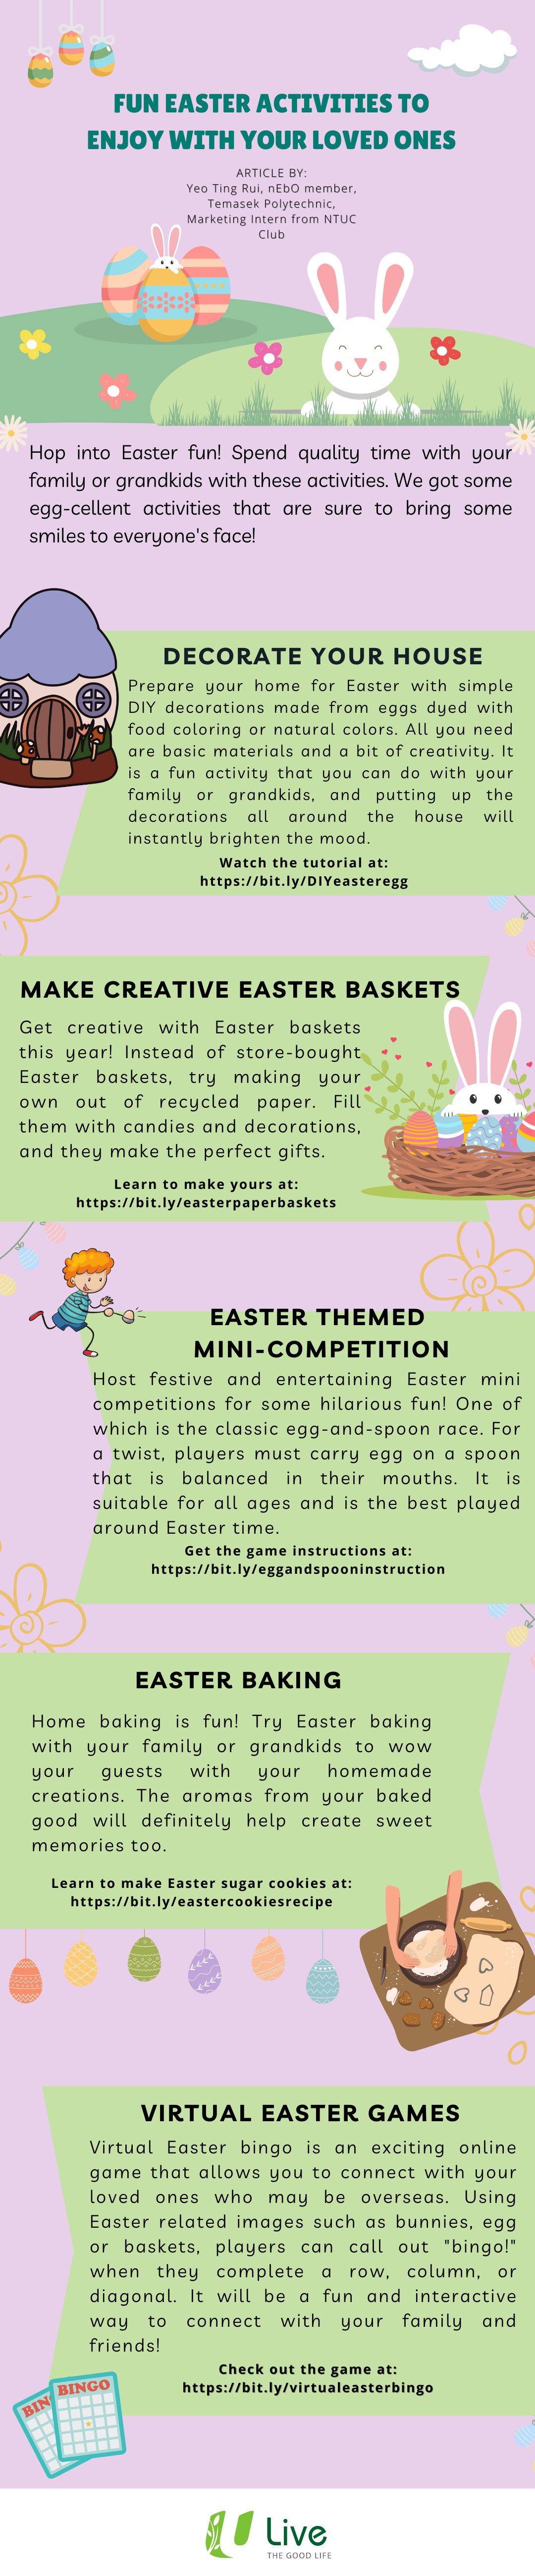 Fun Easter Activities To Enjoy With Your Loved Ones